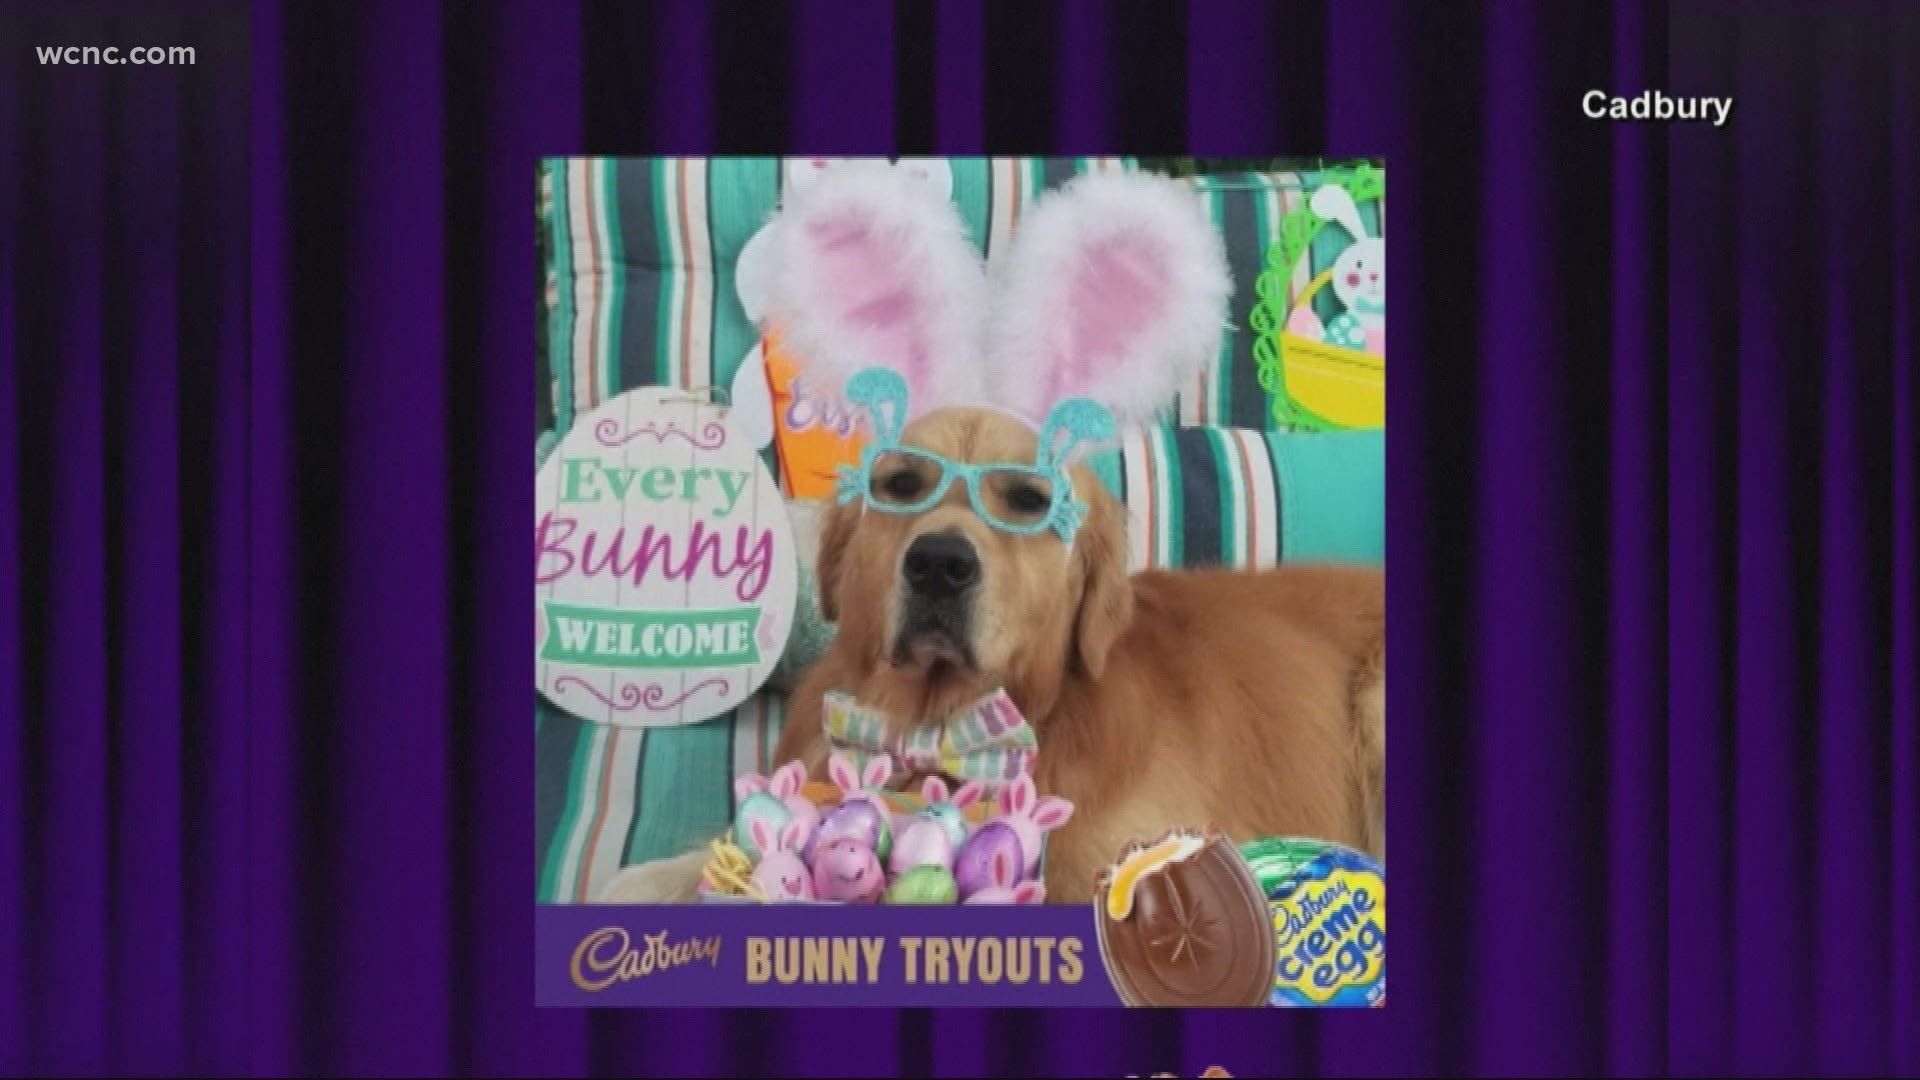 This marks three years of the contest to determine which fluffy friend will be the spokes-animal of the candy company.